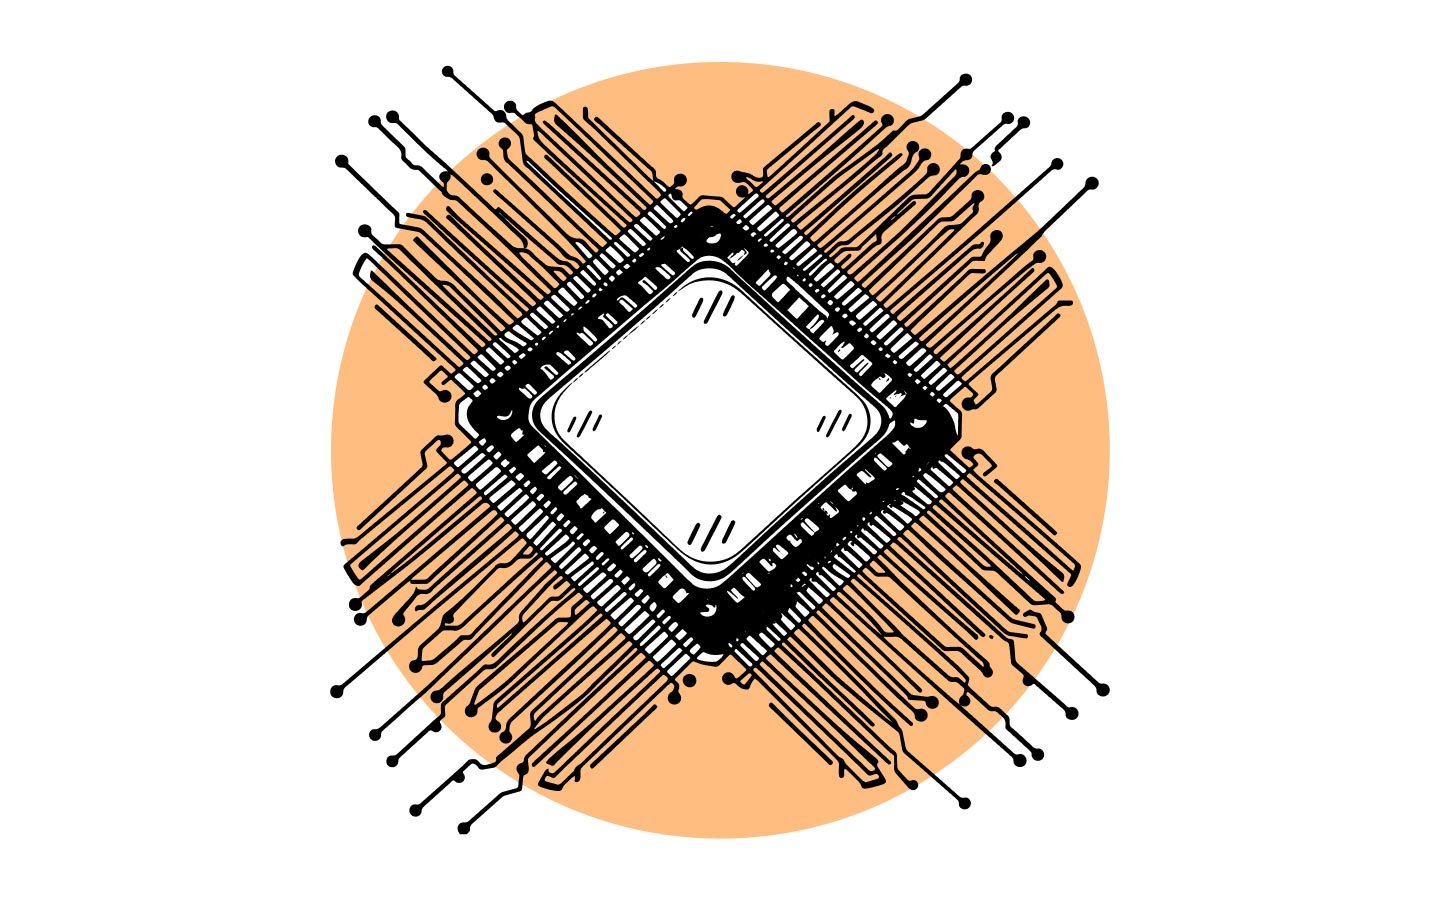 An electronic chip on a circuit board